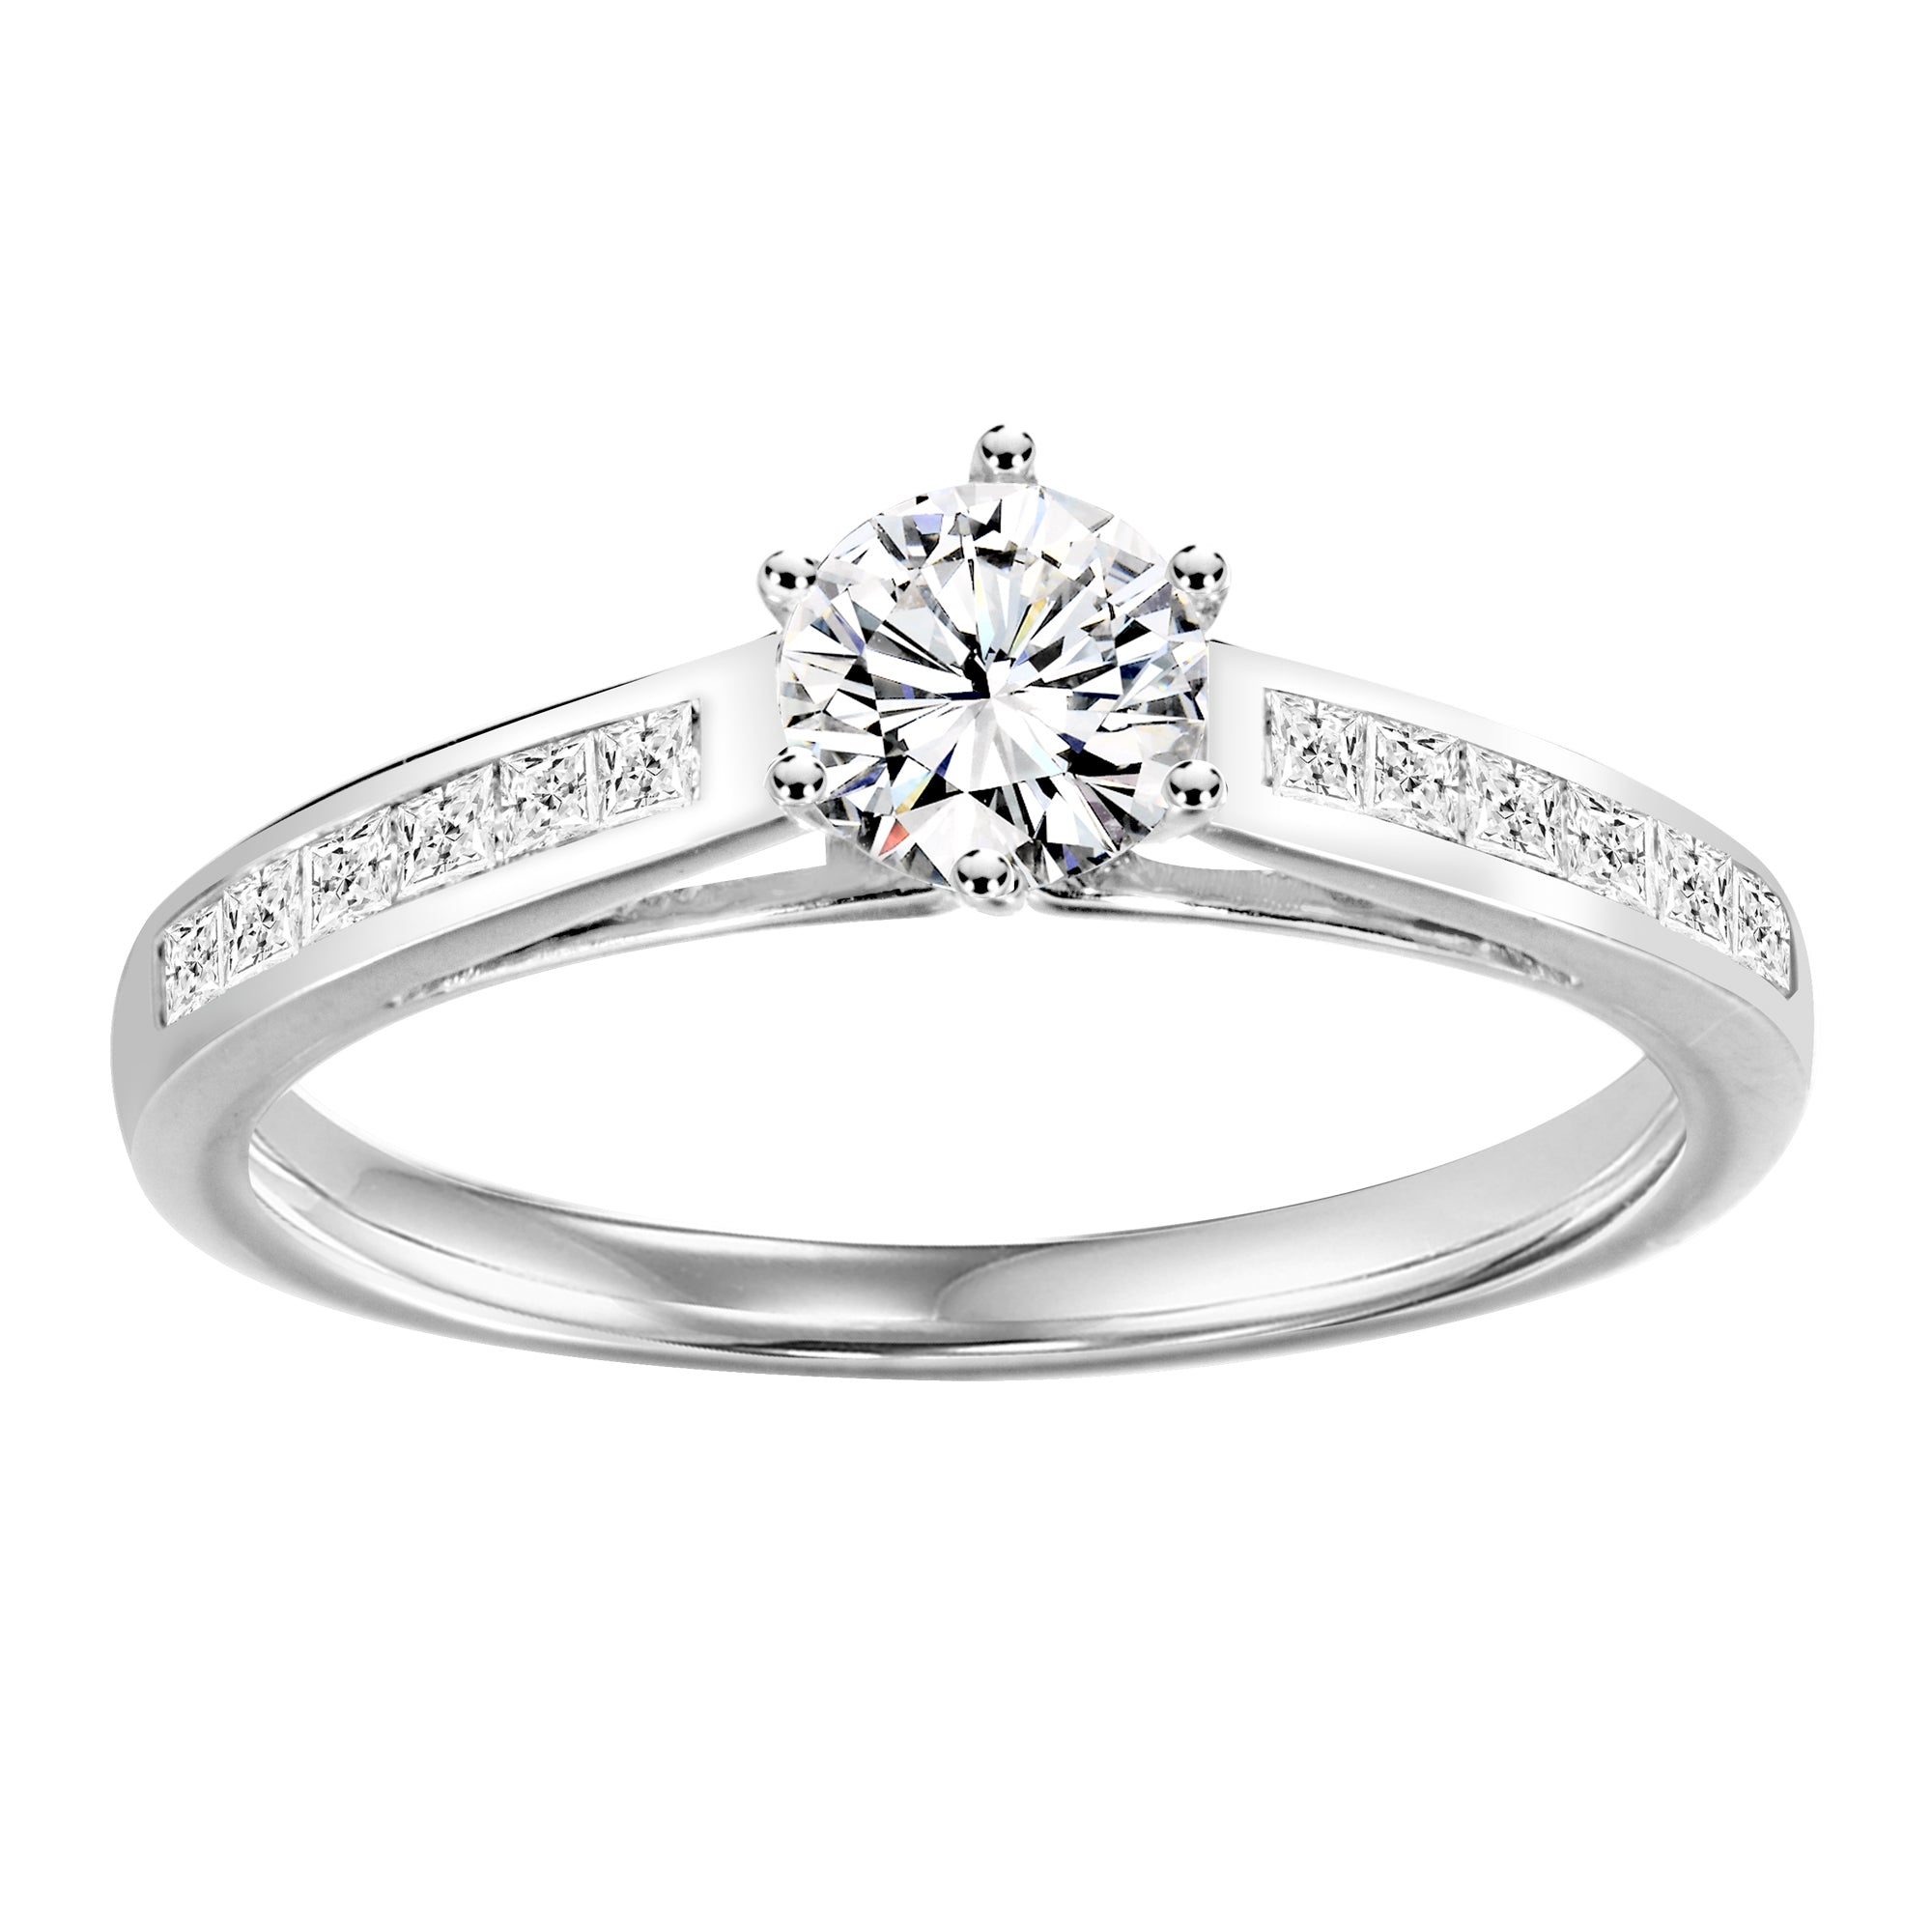 Sterling Silver Cubic Zirconia 0.25ct Ring - AK1032 - Hallmark Jewellers Formby & The Jewellers Bench Widnes